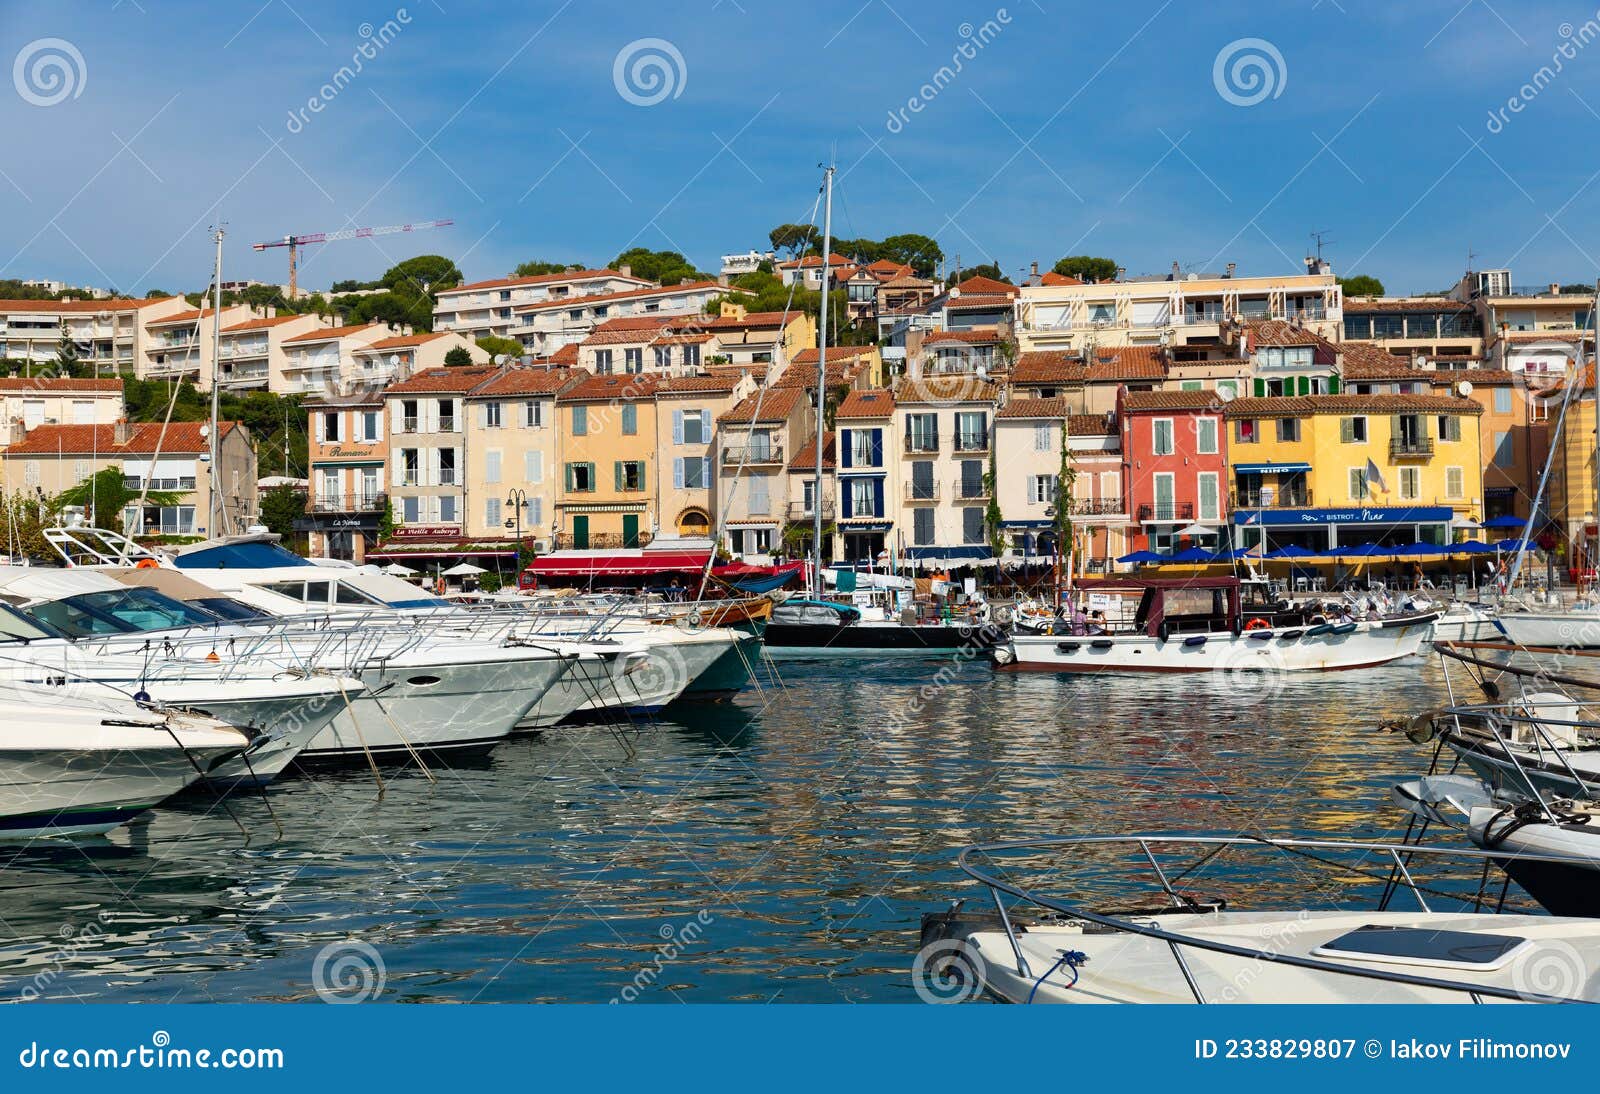 Cassis, France - September 27, 2021: Boats and Yahts in the Old Port of ...